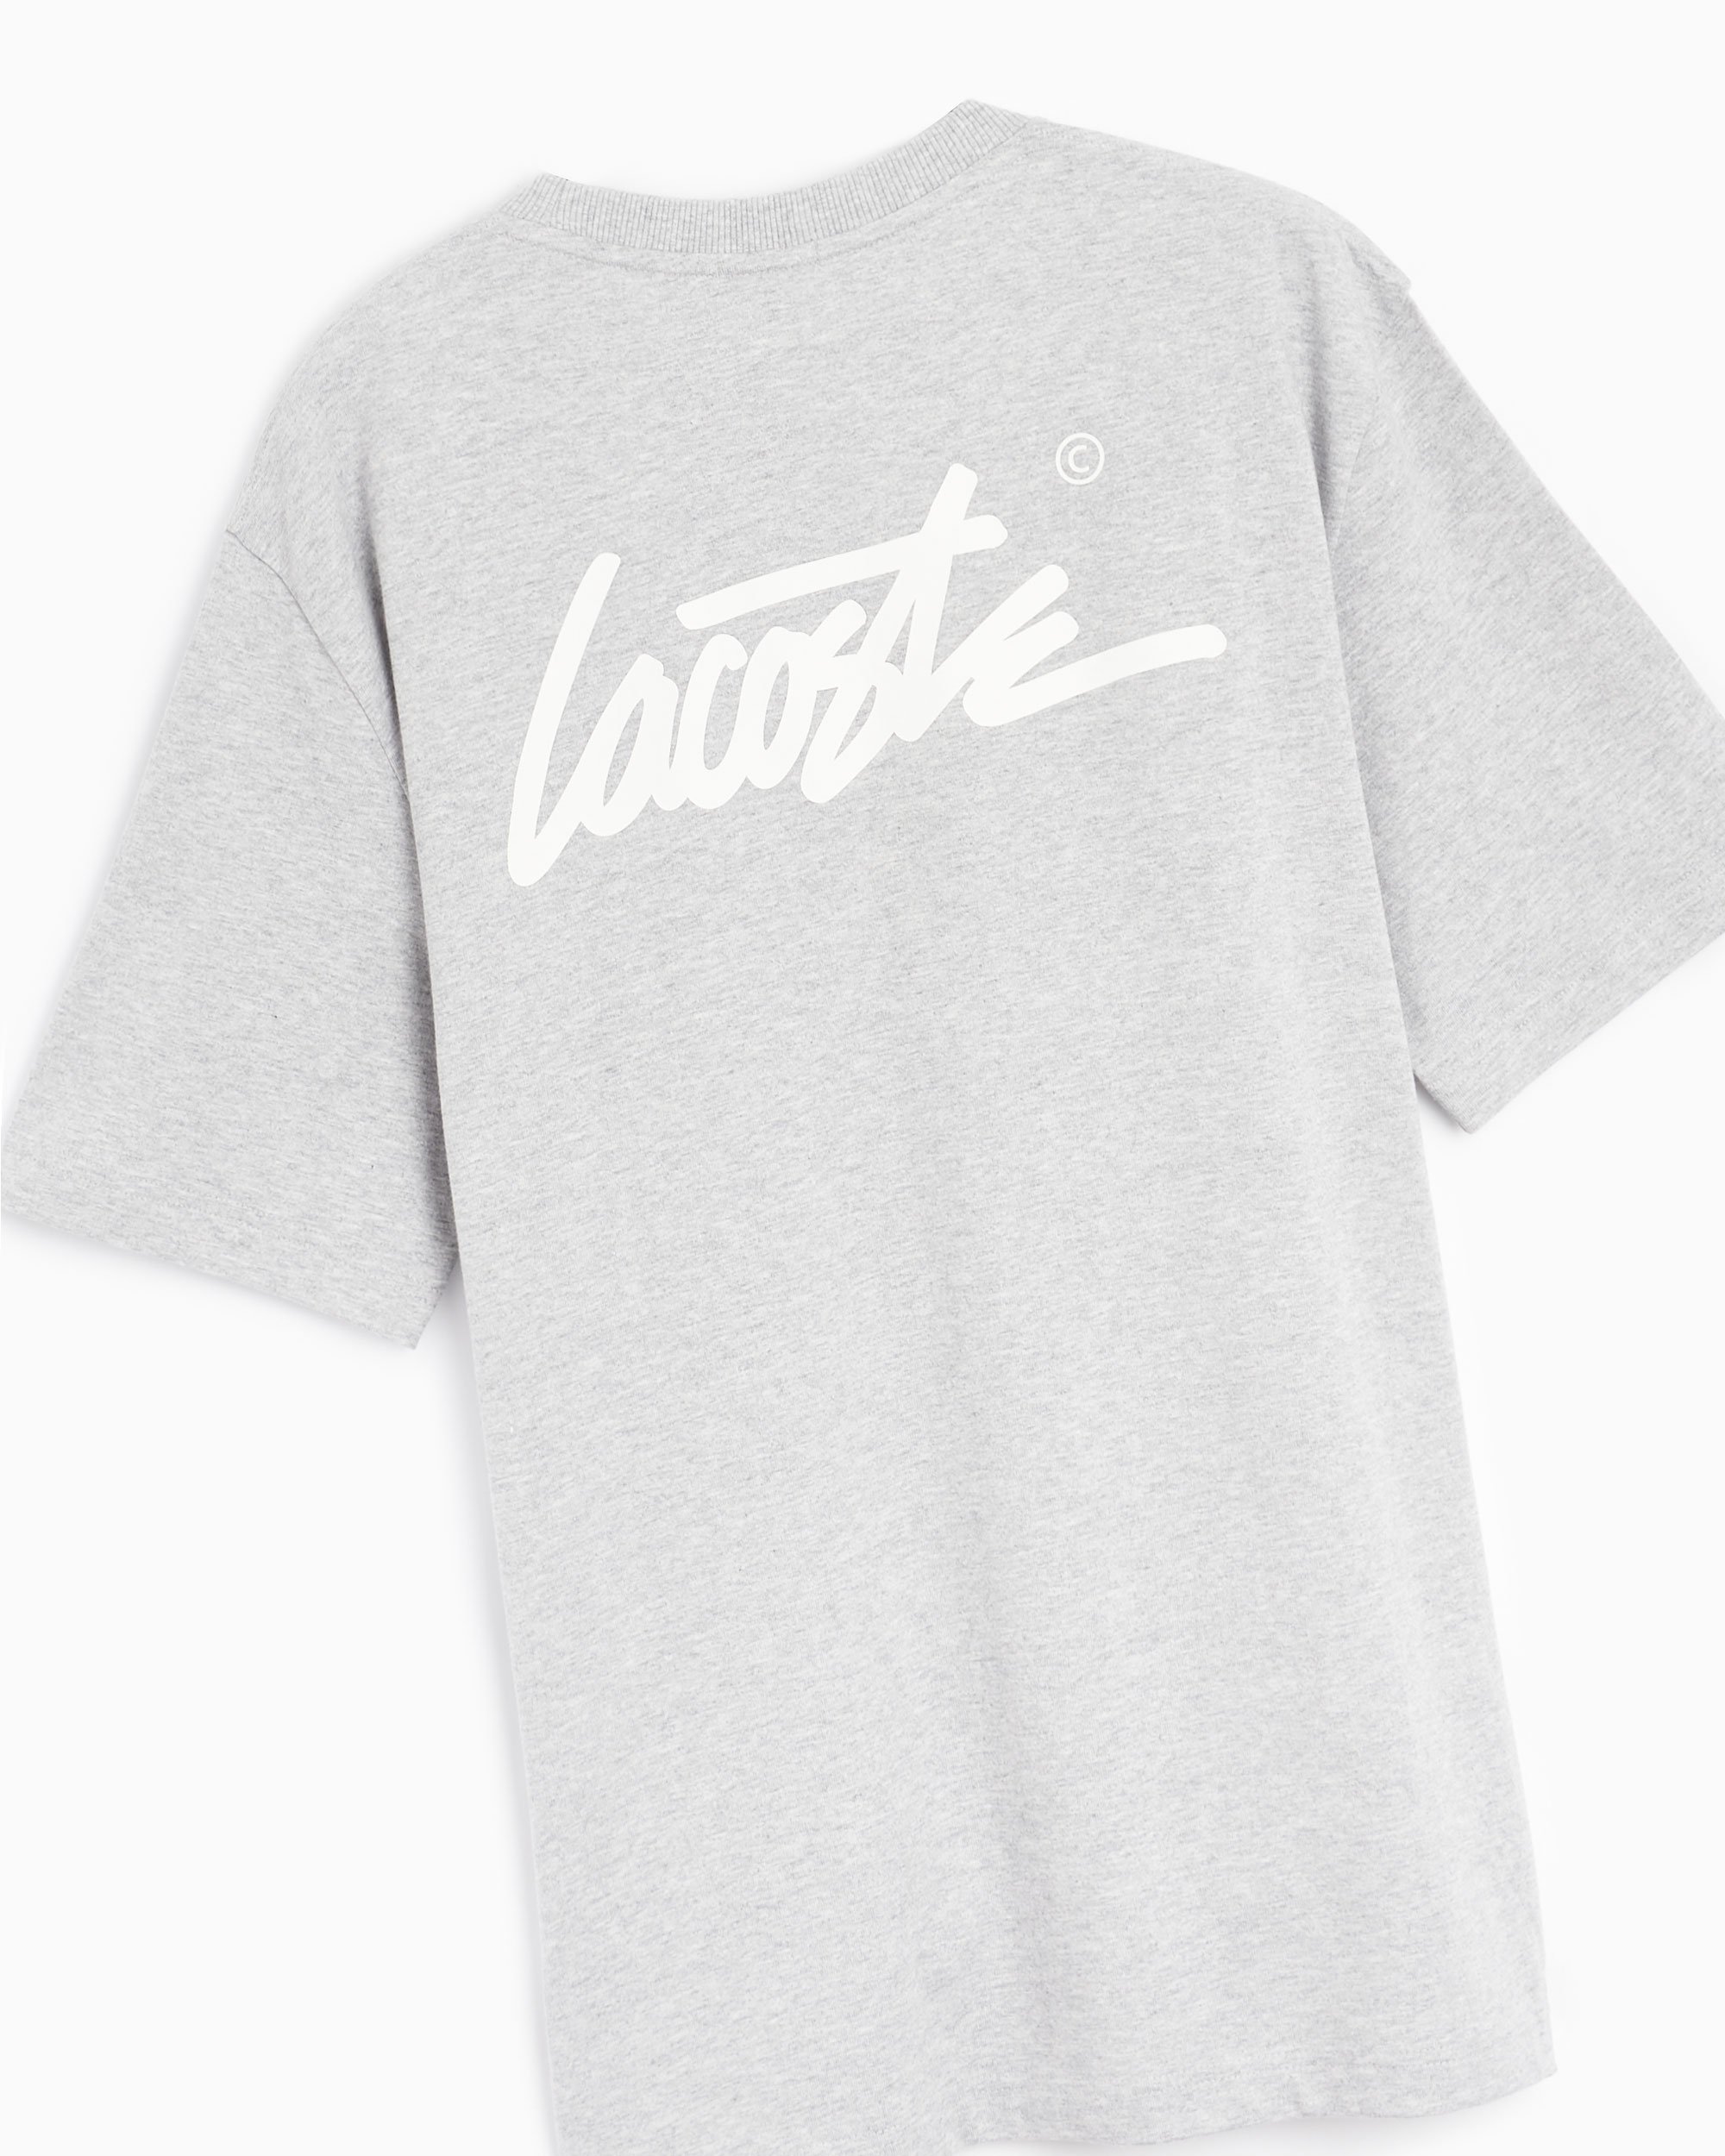 Lacoste Live Unisex Loose Fit T-Shirt Gray TH2748-00-BG3| Buy Online at ...